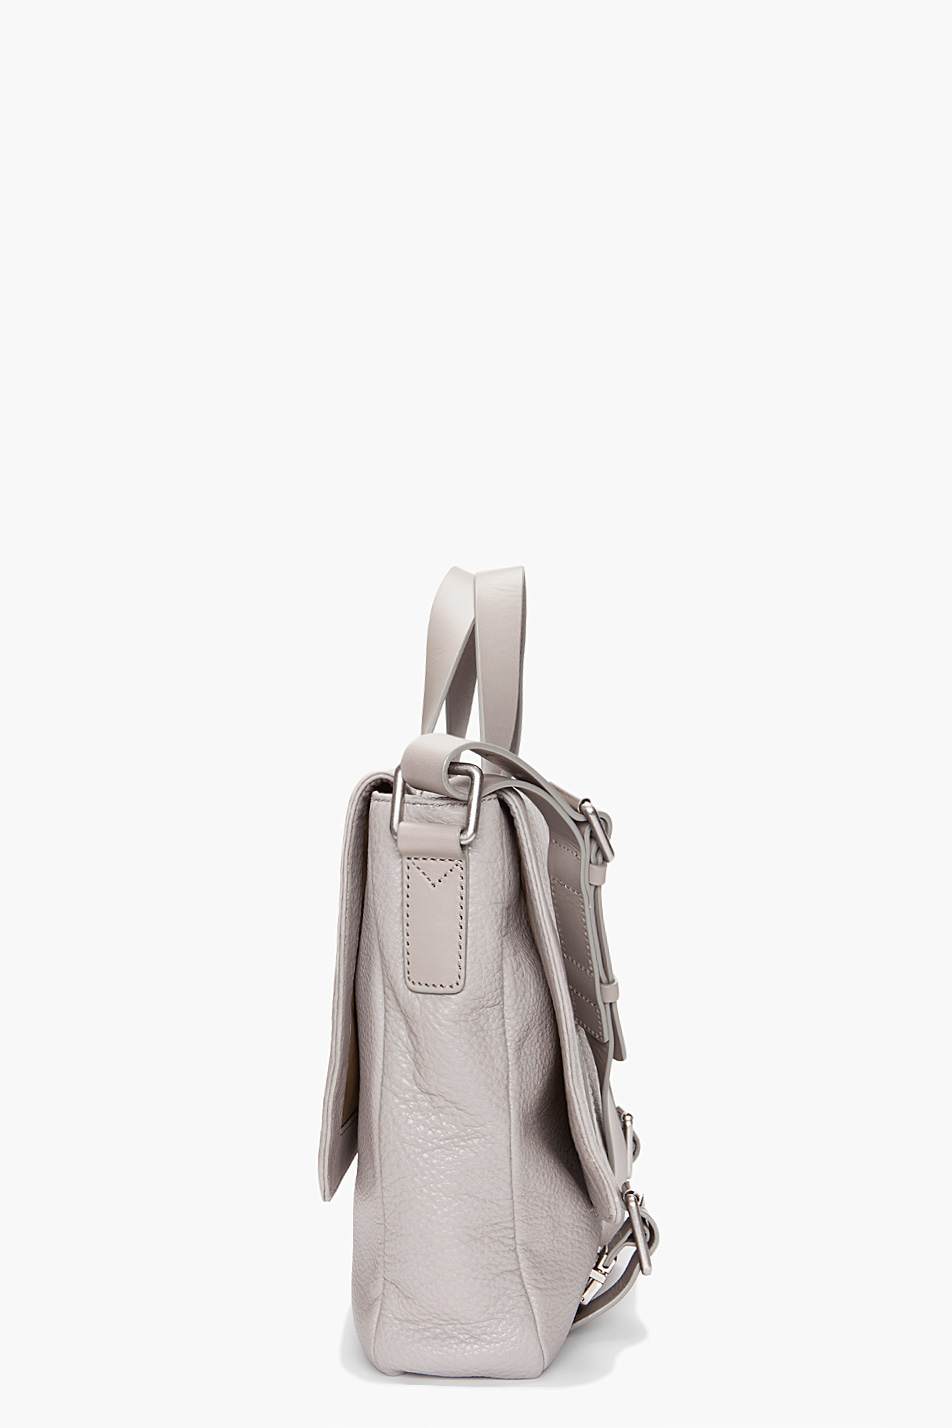 Lyst - Marc By Marc Jacobs Robbie G Messenger Bag in Gray for Men